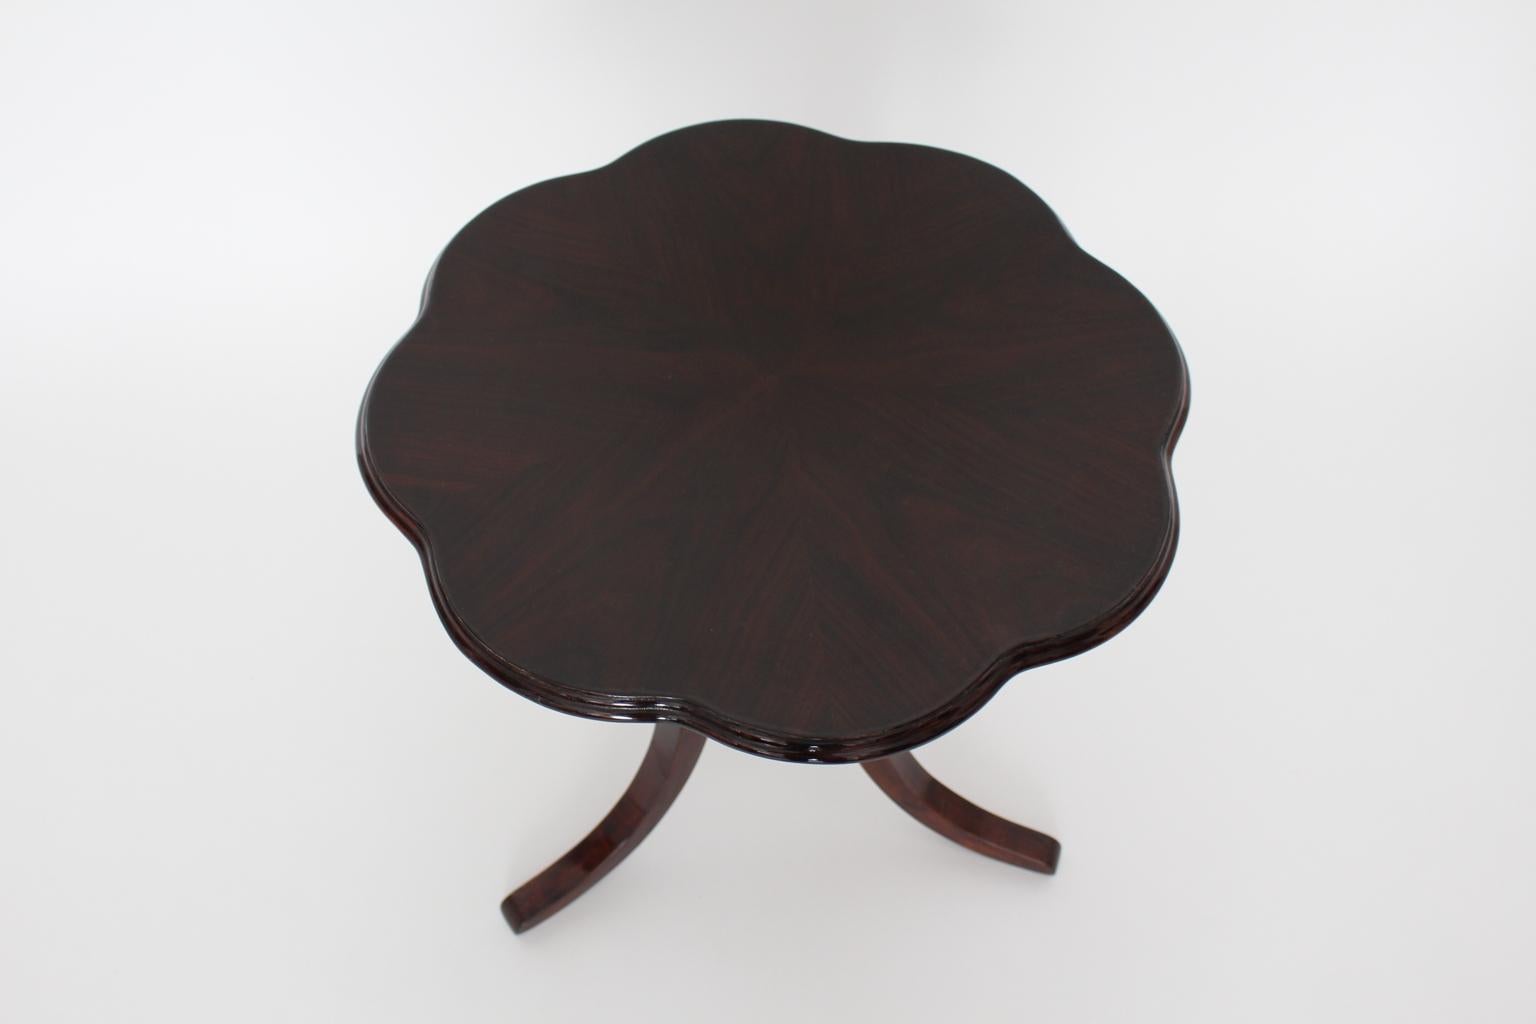 Art Deco Walnut Side Table or Coffee Table by Josef Frank for Thonet, circa 1925 For Sale 5